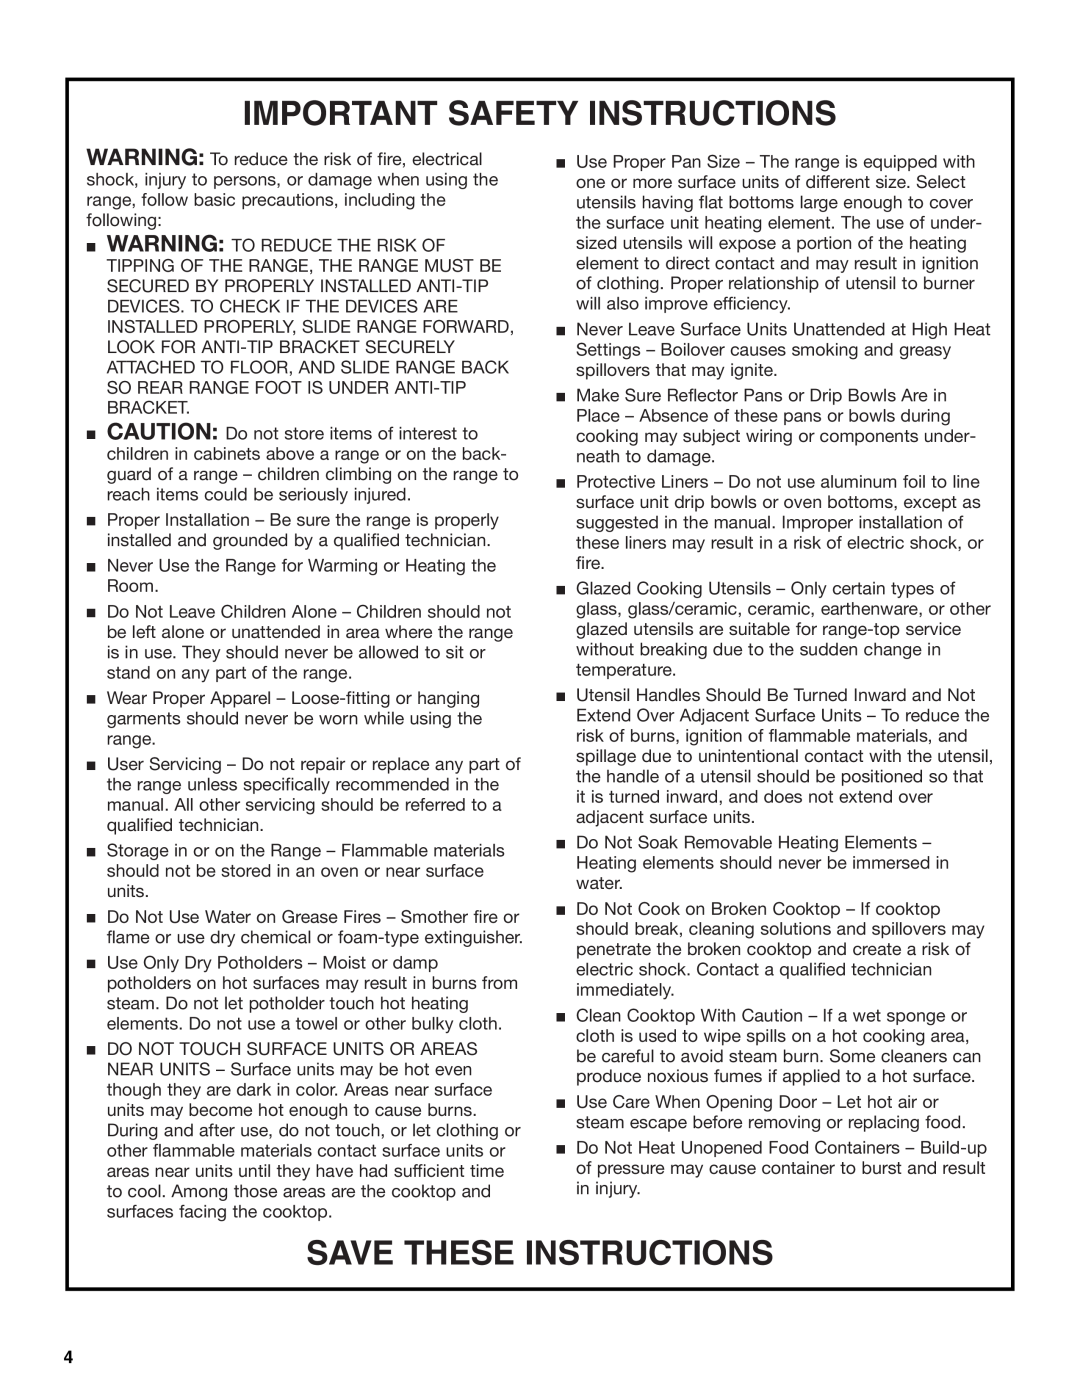 Whirlpool RME30000 manual Important Safety Instructions, Save These Instructions 